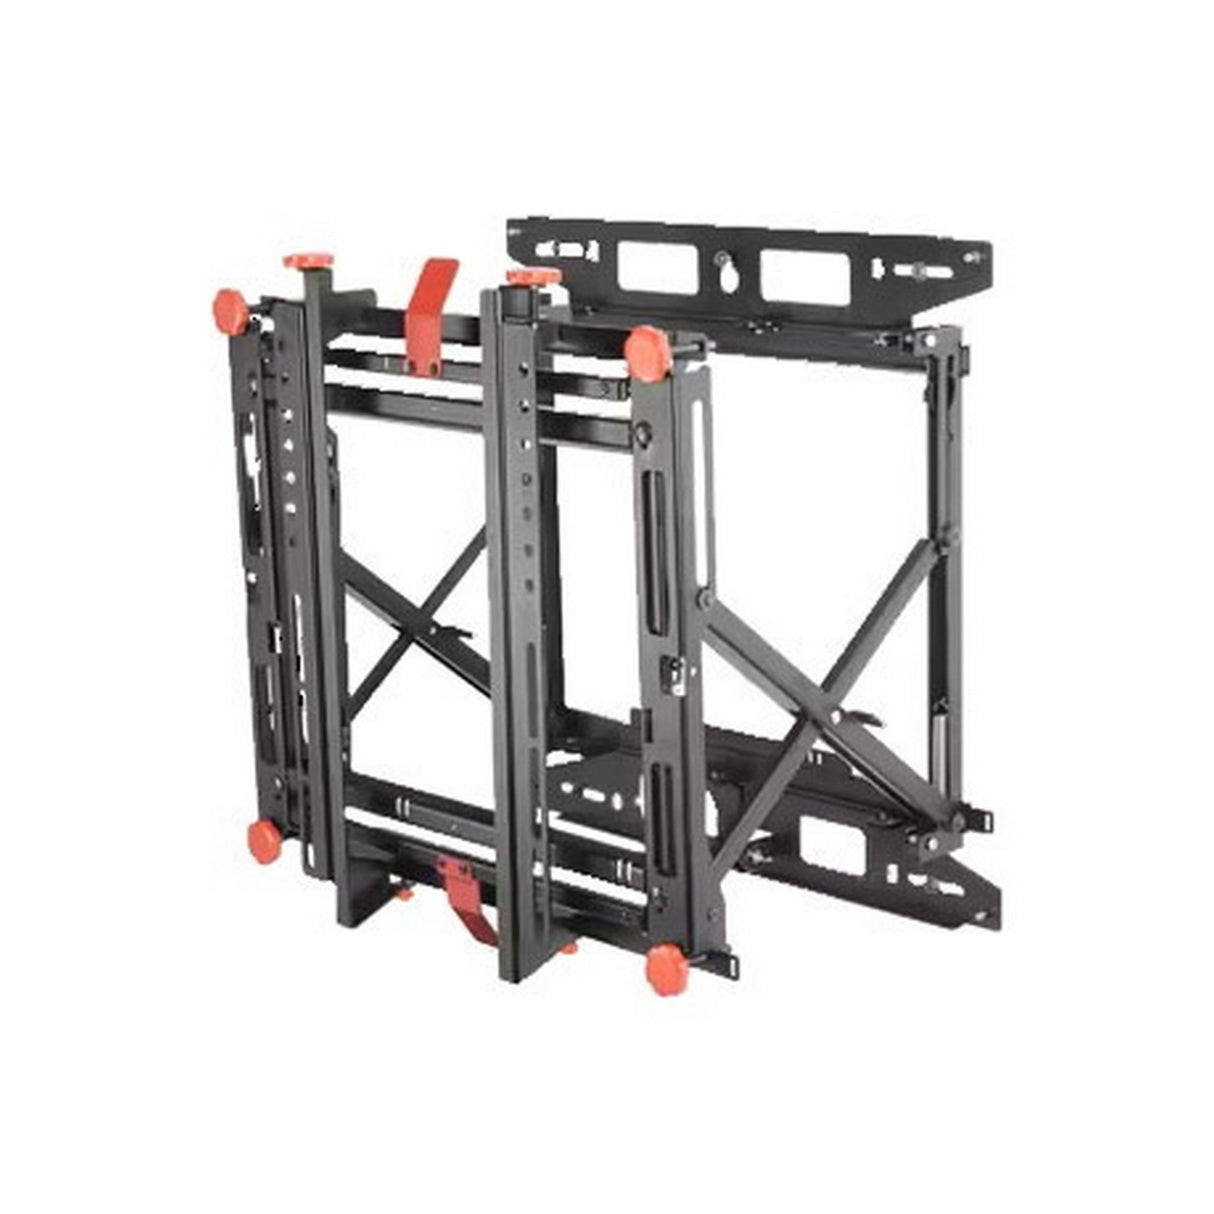 Christie MPL15 Wall-Mount for LCD Video Panels